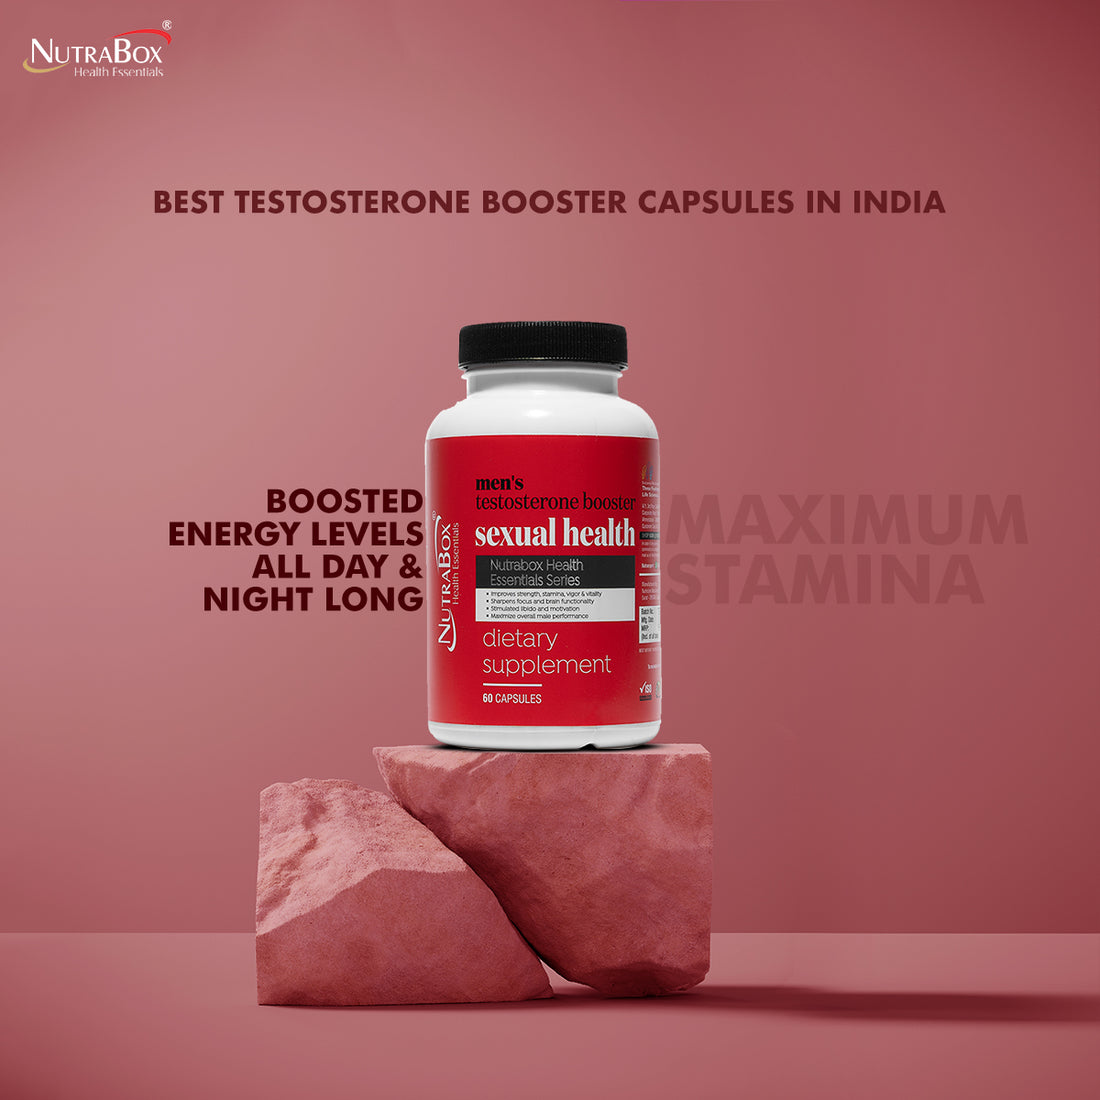 Best Testosterone Booster Capsules in India